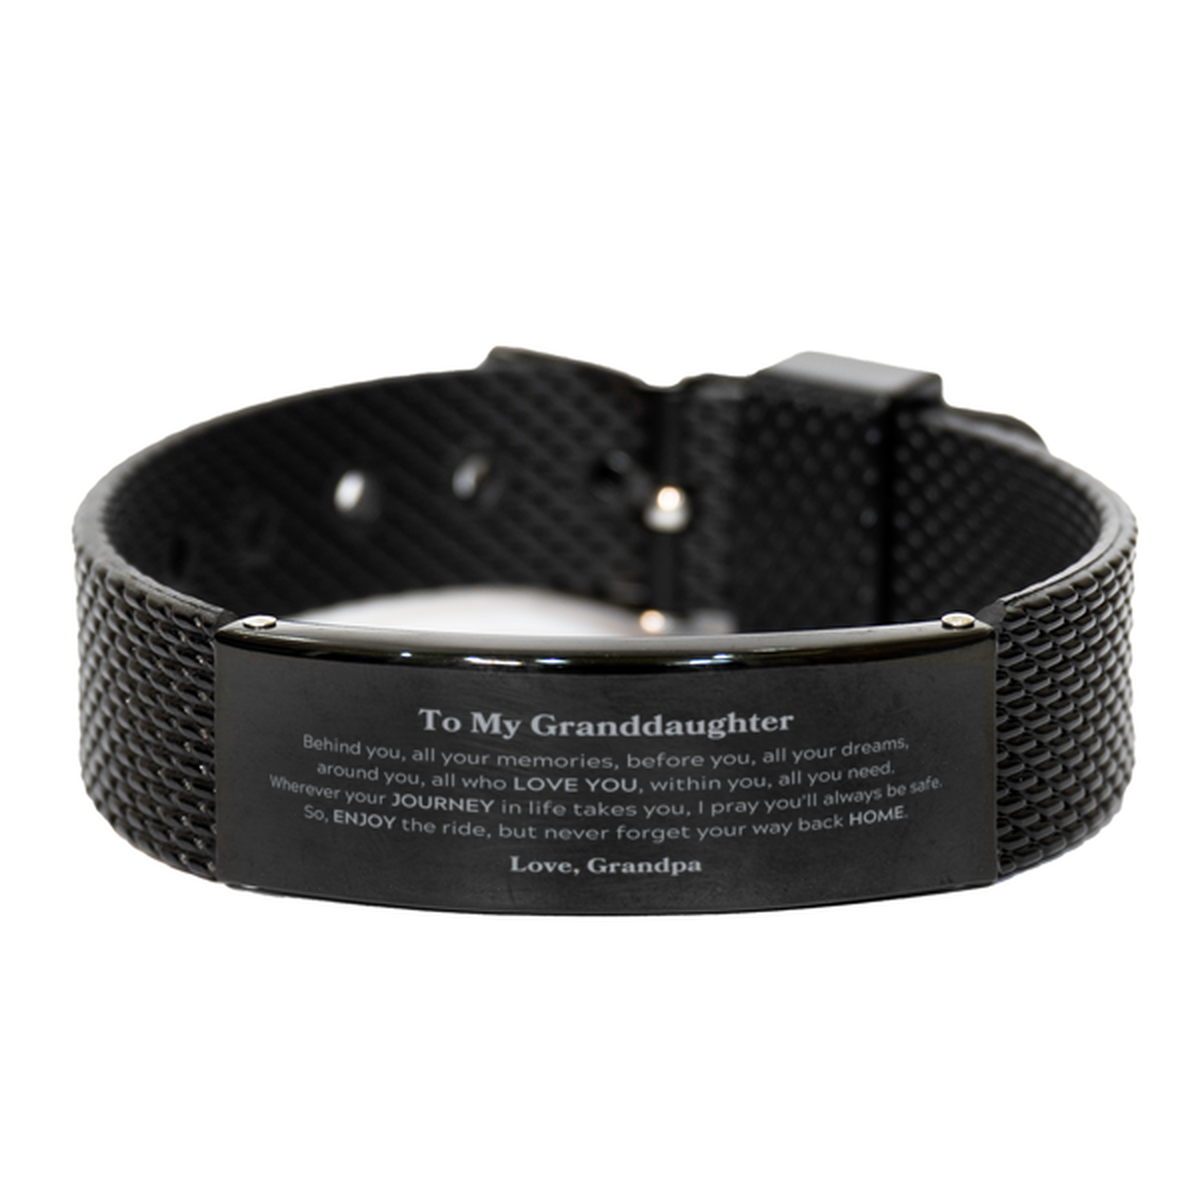 To My Granddaughter Graduation Gifts from Grandpa, Granddaughter Black Shark Mesh Bracelet Christmas Birthday Gifts for Granddaughter Behind you, all your memories, before you, all your dreams. Love, Grandpa